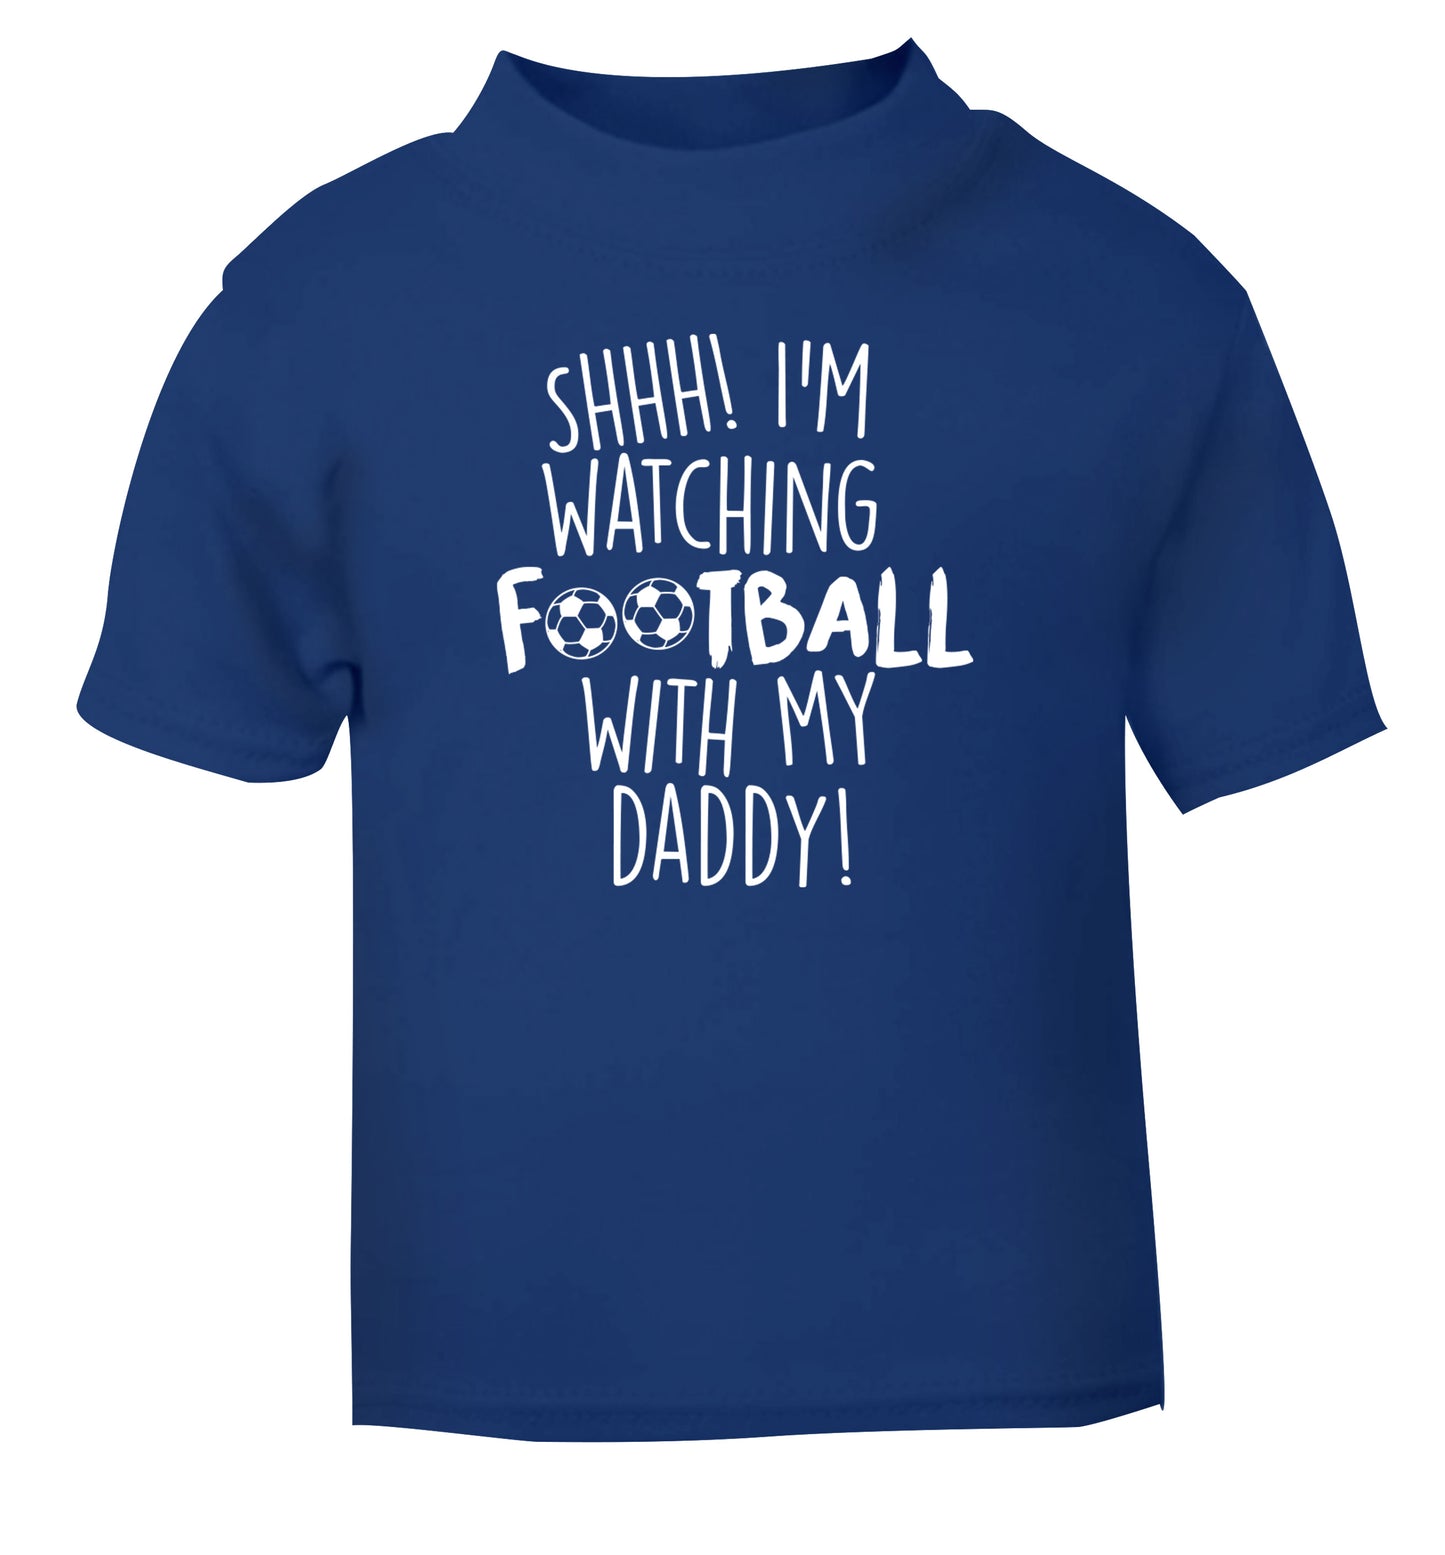 Shhh I'm watching football with my daddy blue Baby Toddler Tshirt 2 Years